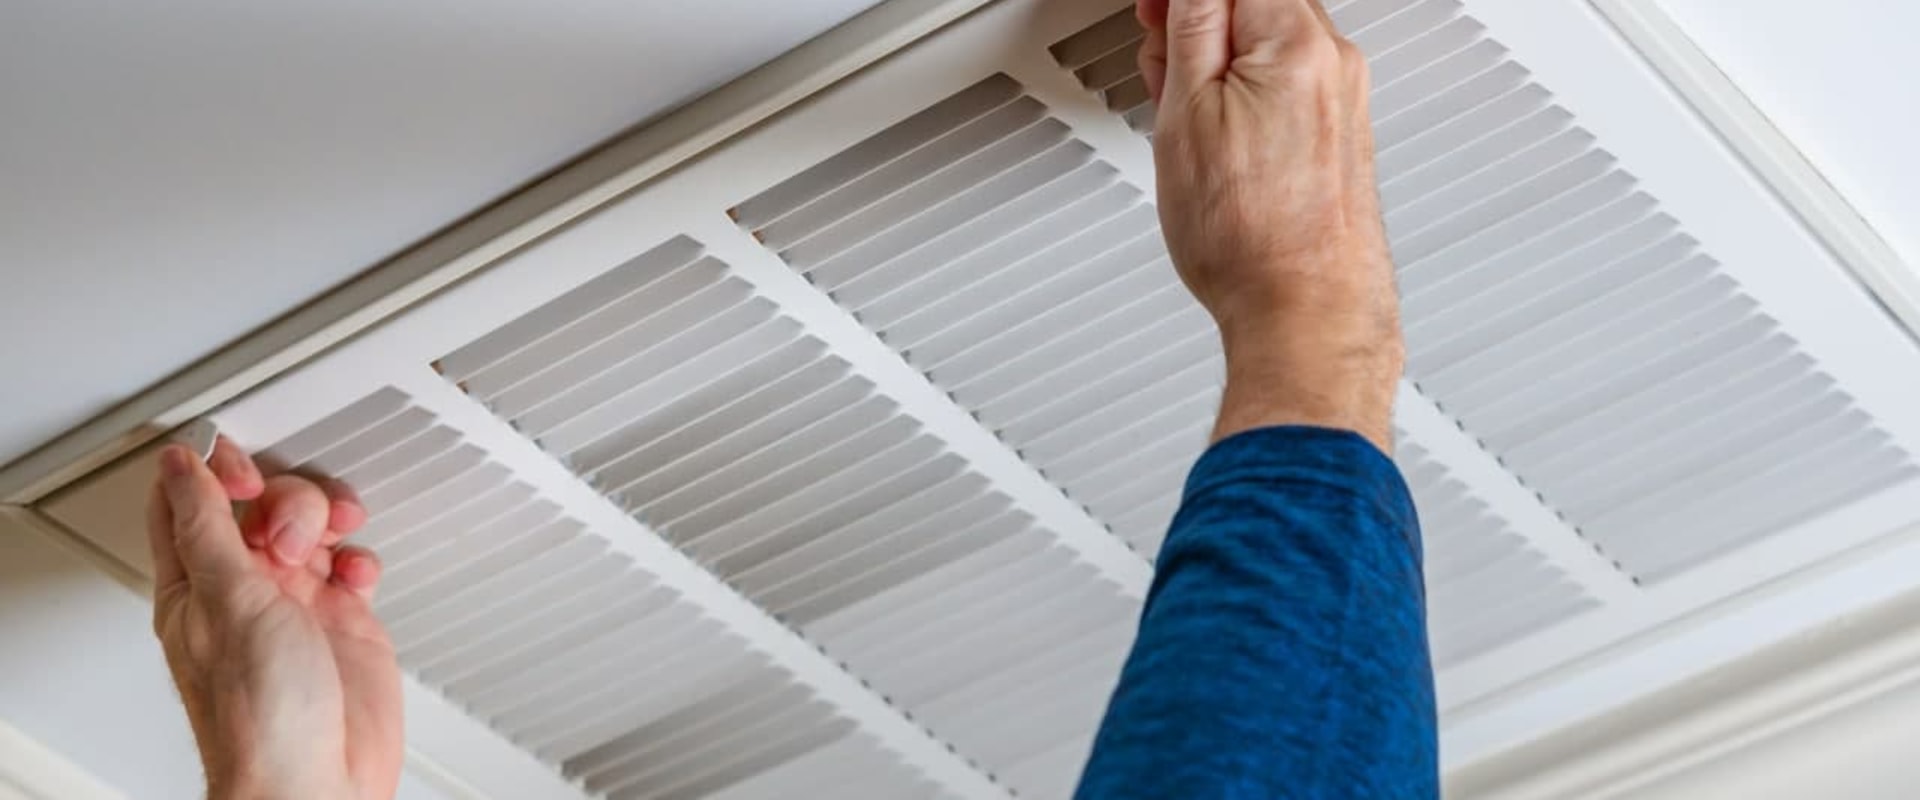 How to Find the Right Air Filter Size